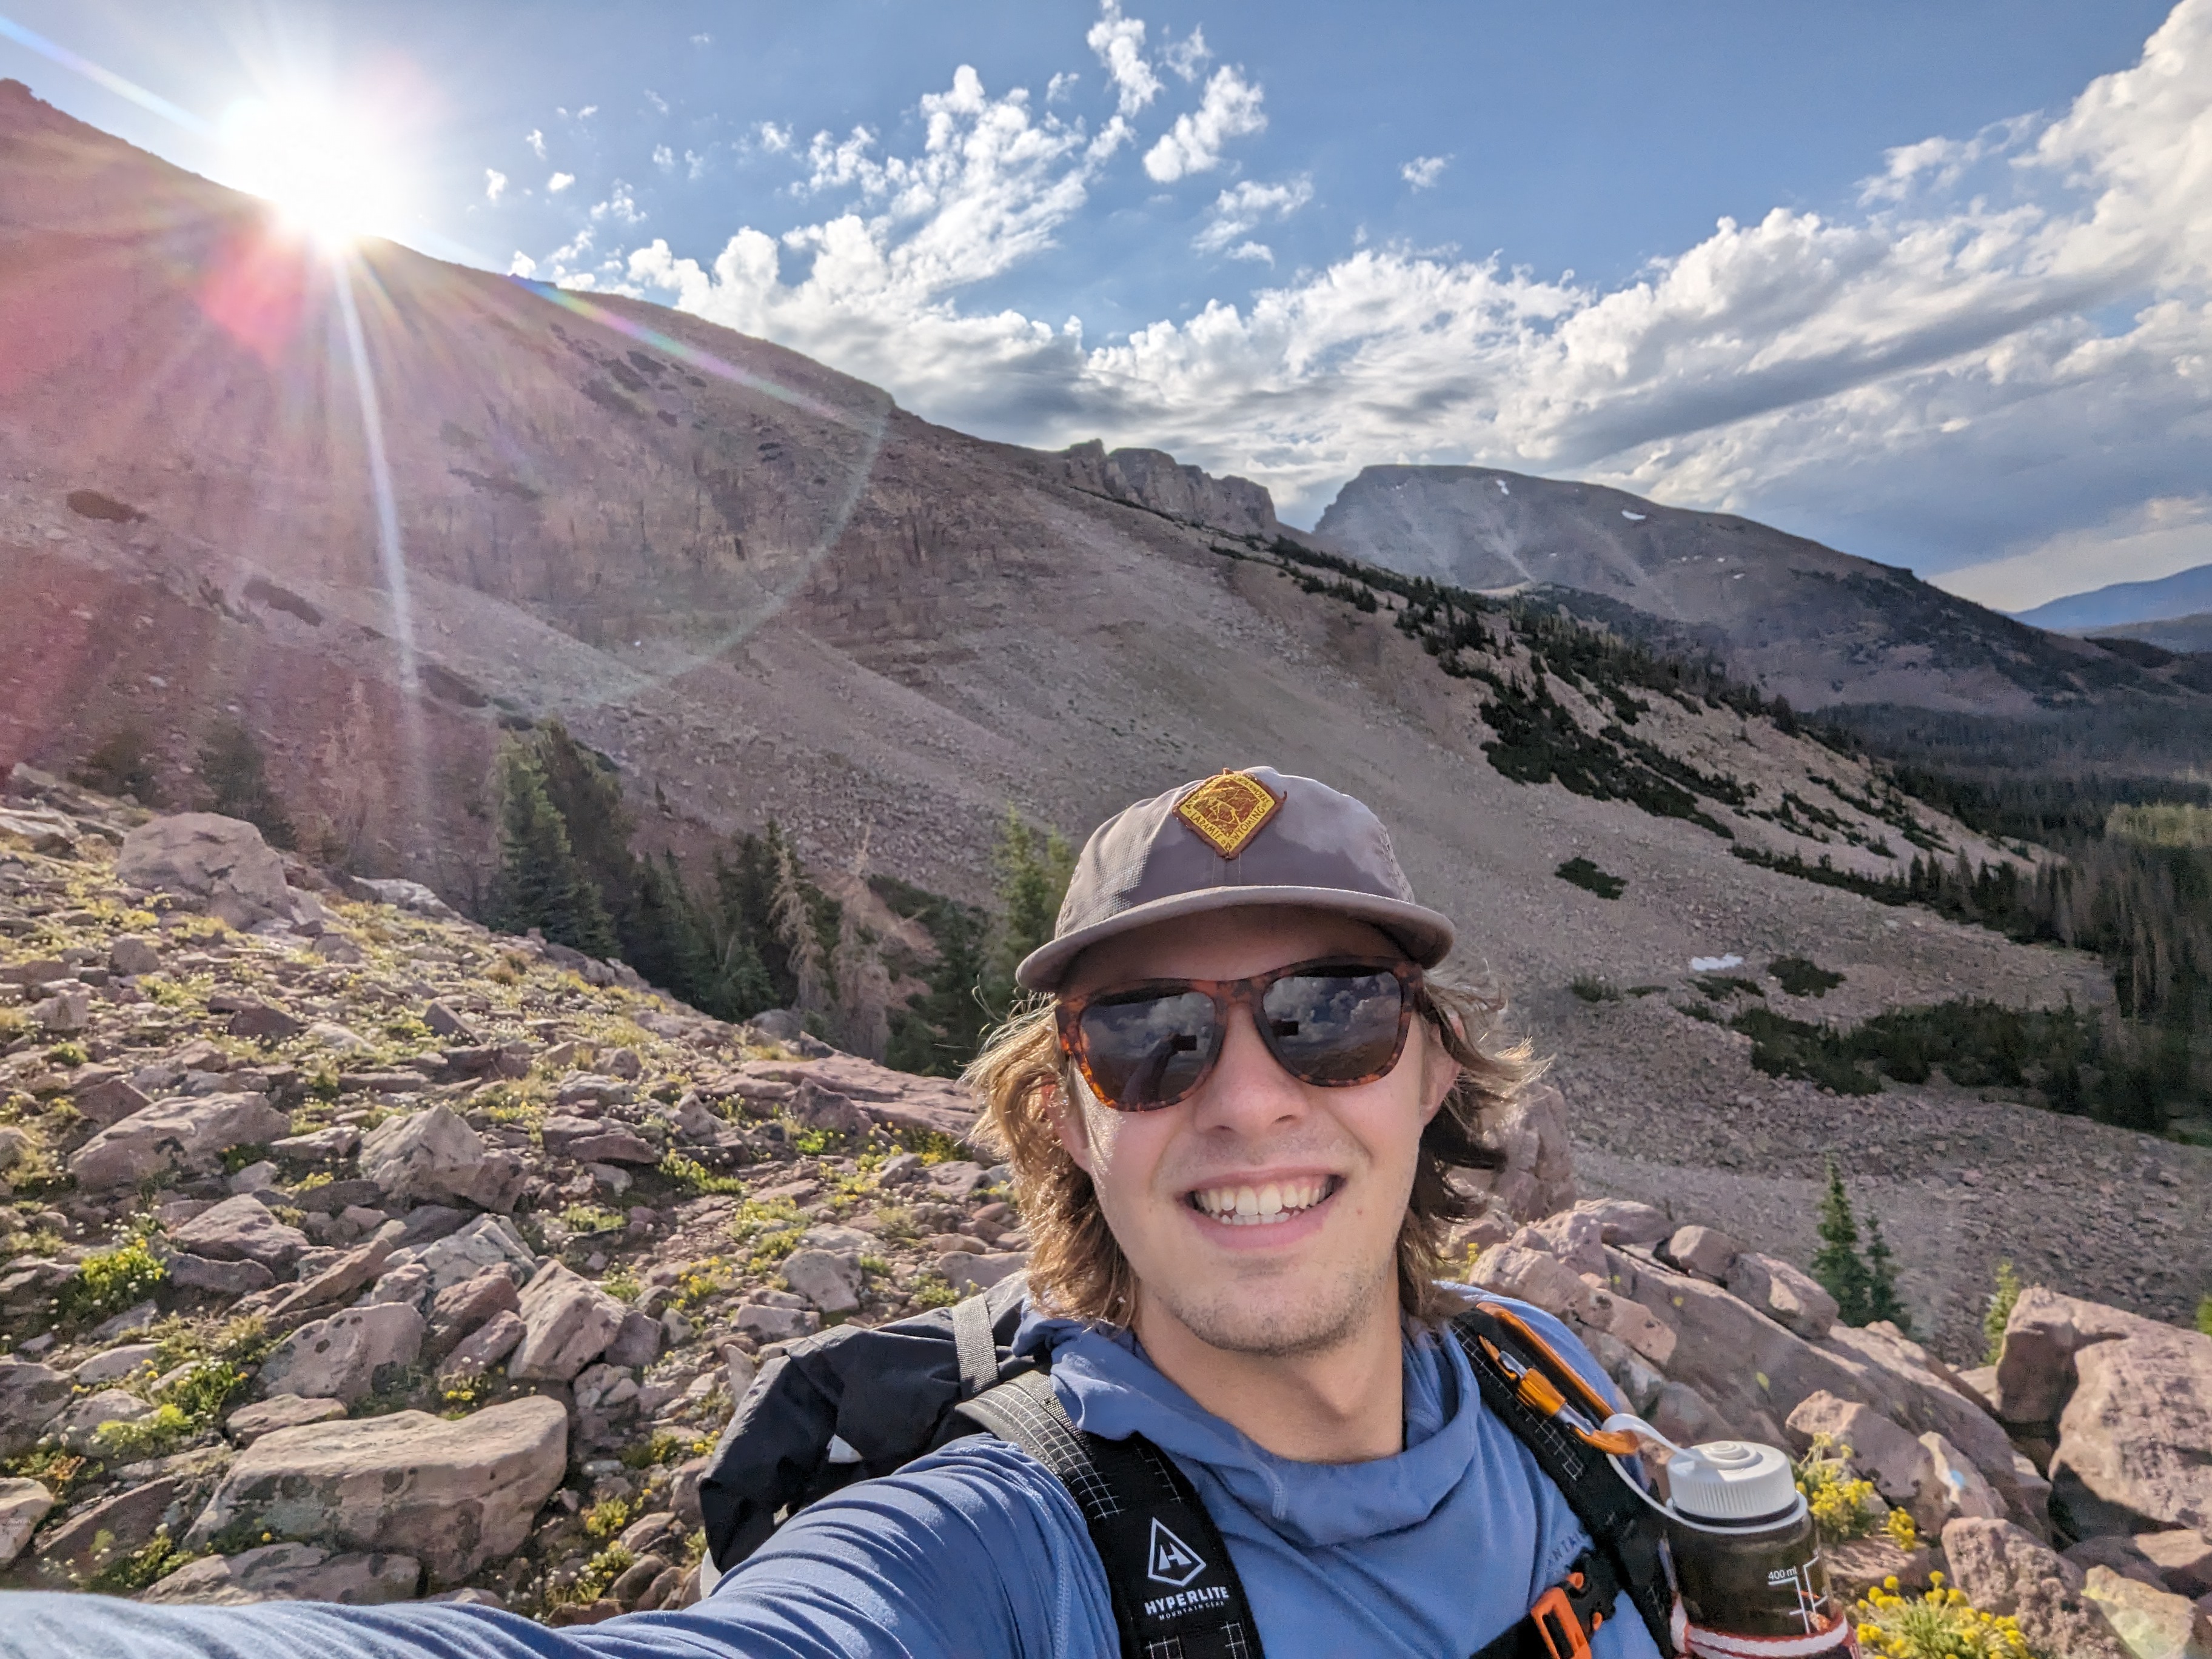 Riley Ovard on his way up Hayden Peak in the Uinta Mountains, right before crossing a talus field